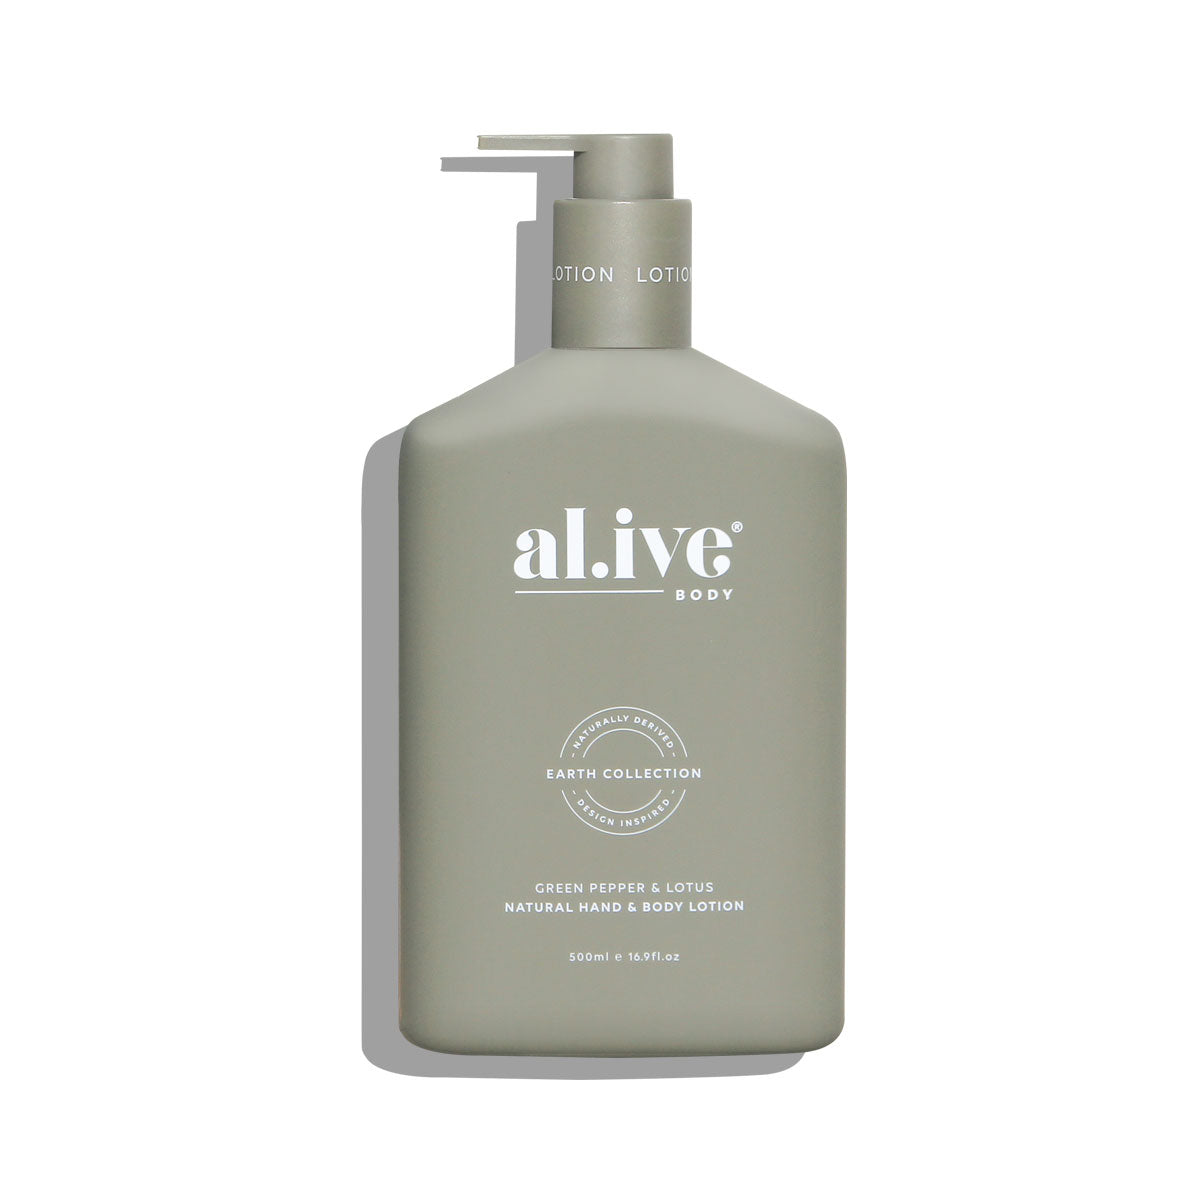 ALIVE BODY HAND & BODY LOTION - GREEN PEPPER & LOTUS